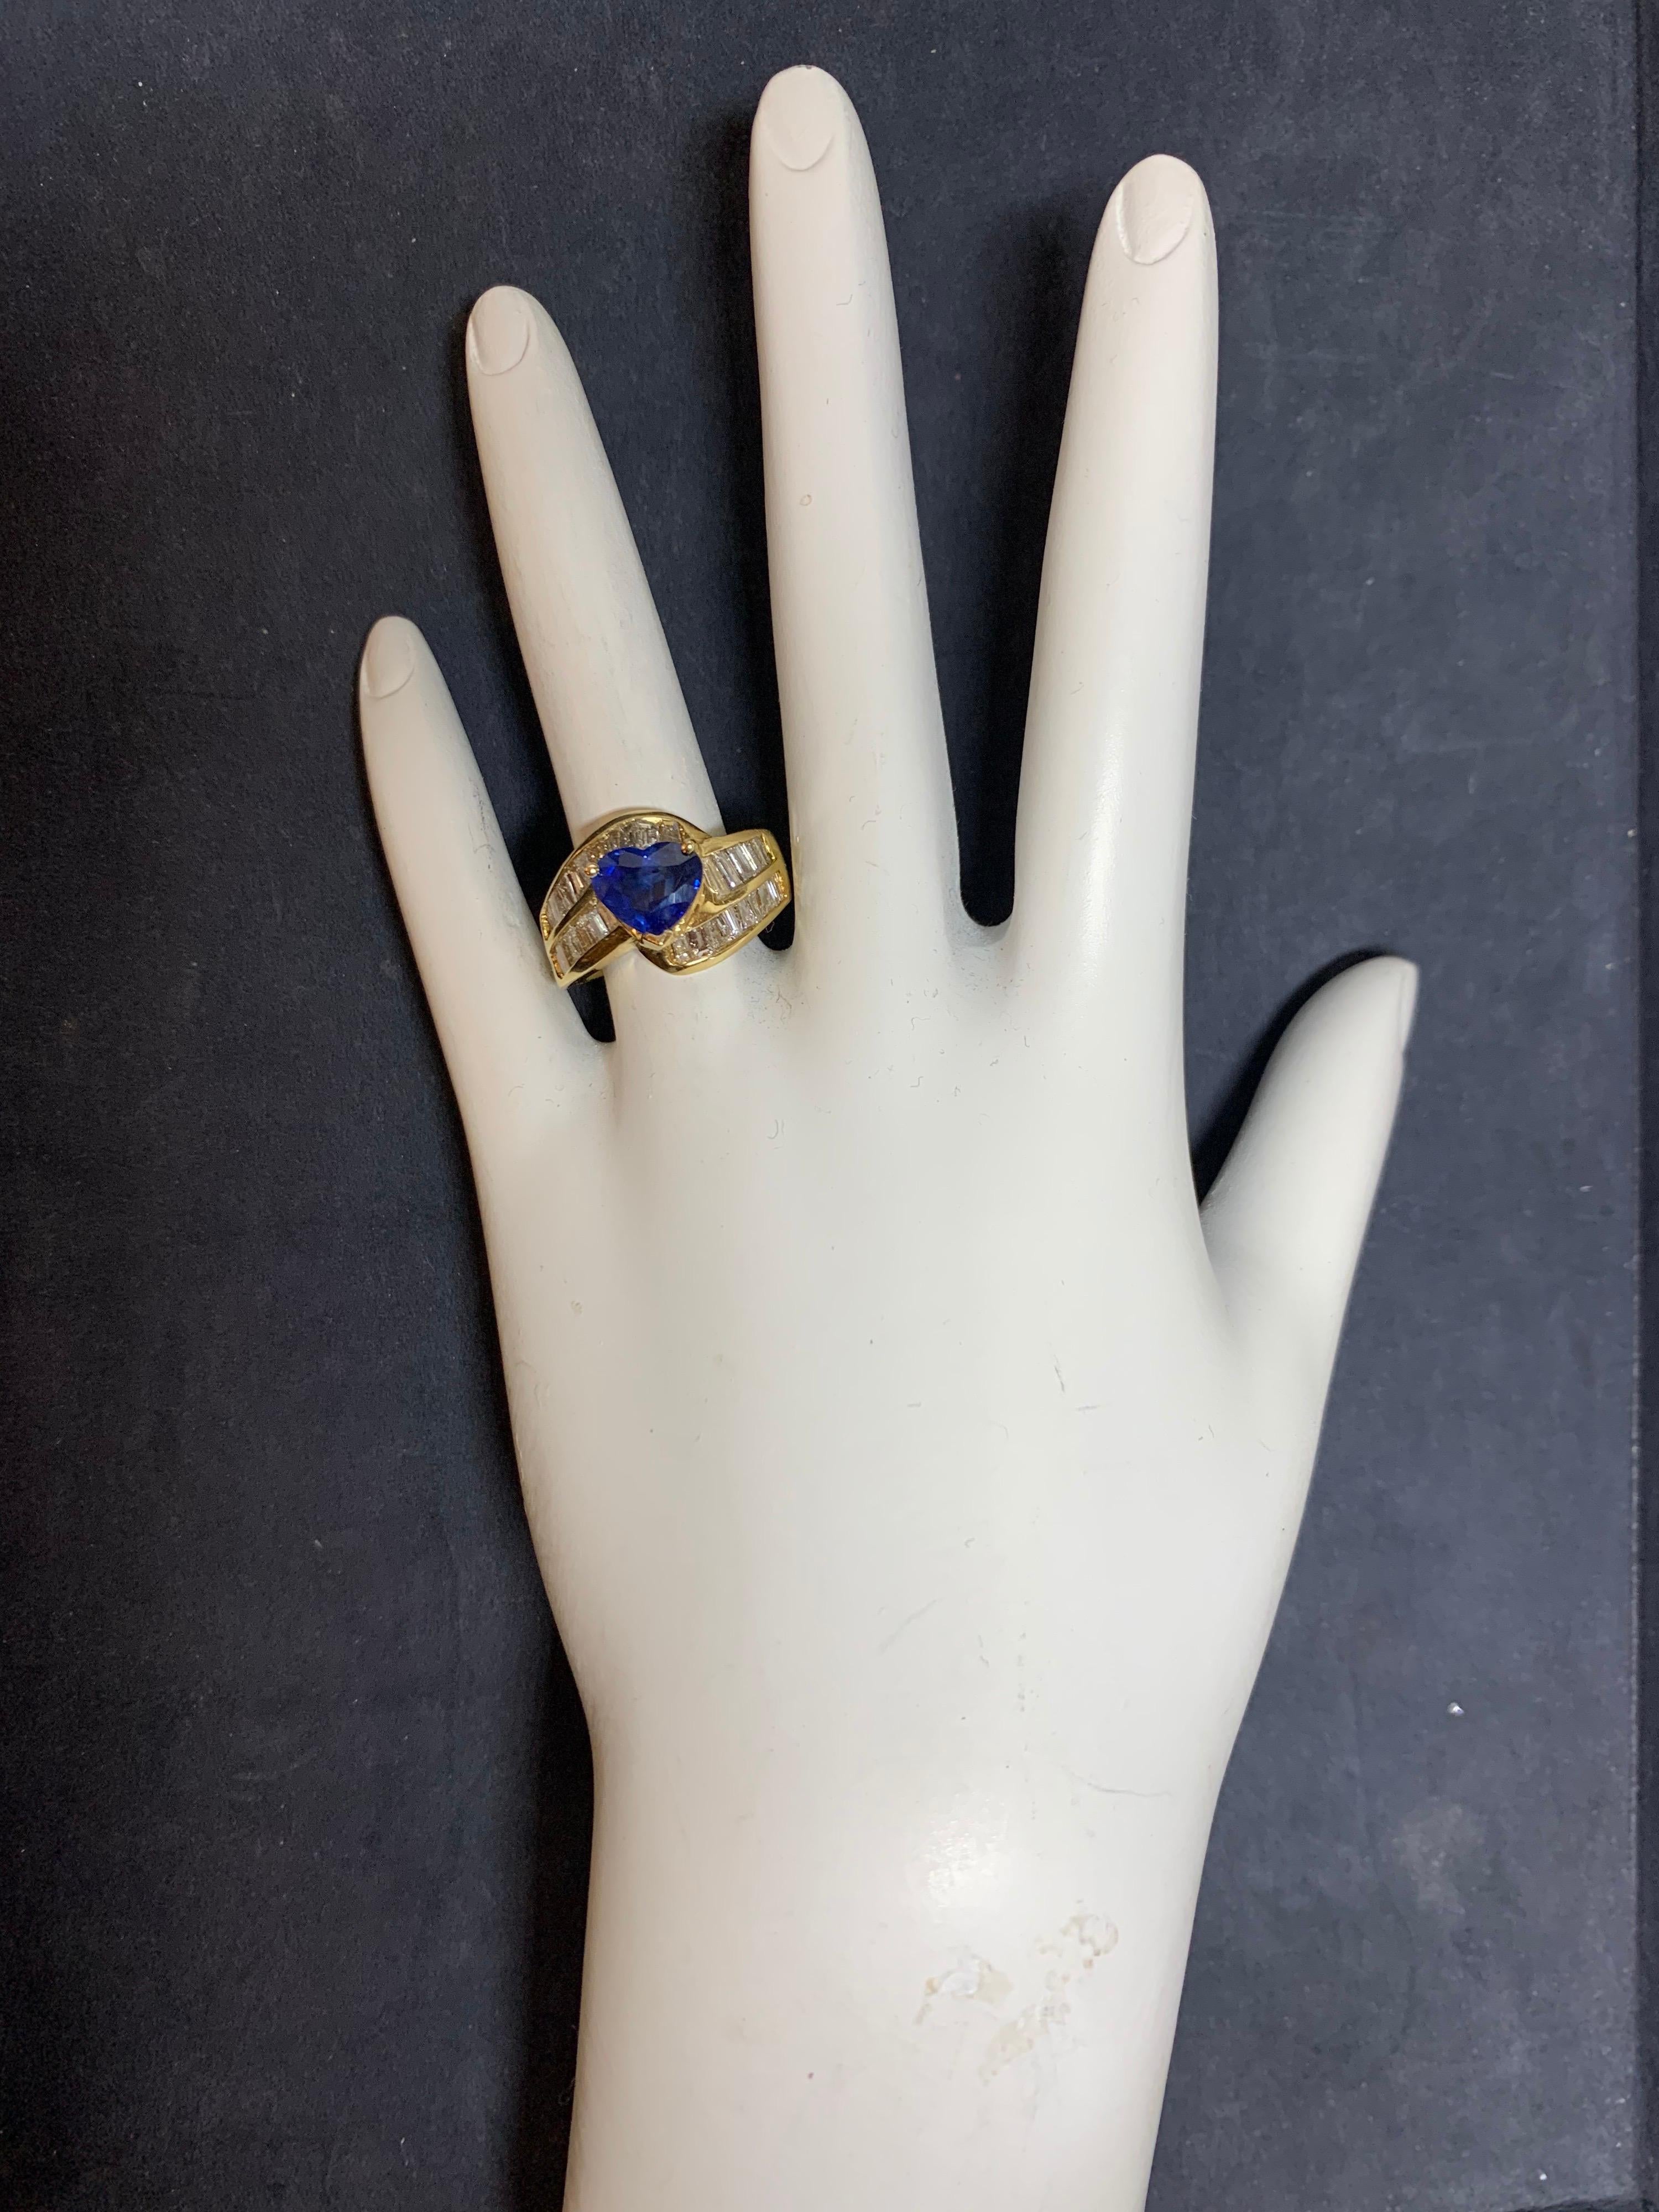 Retro 18k Yellow Gold Cocktail Ring.

Set with an approximately 2 Natural Heart Shape Sapphire (approximately 7.8x8.5x4.1mm) & approximately 2.50 carats of 36 natural Baguette Diamonds. 

Ring weighs 10.5 grams, size is 6.

Condition is Pre-owned.